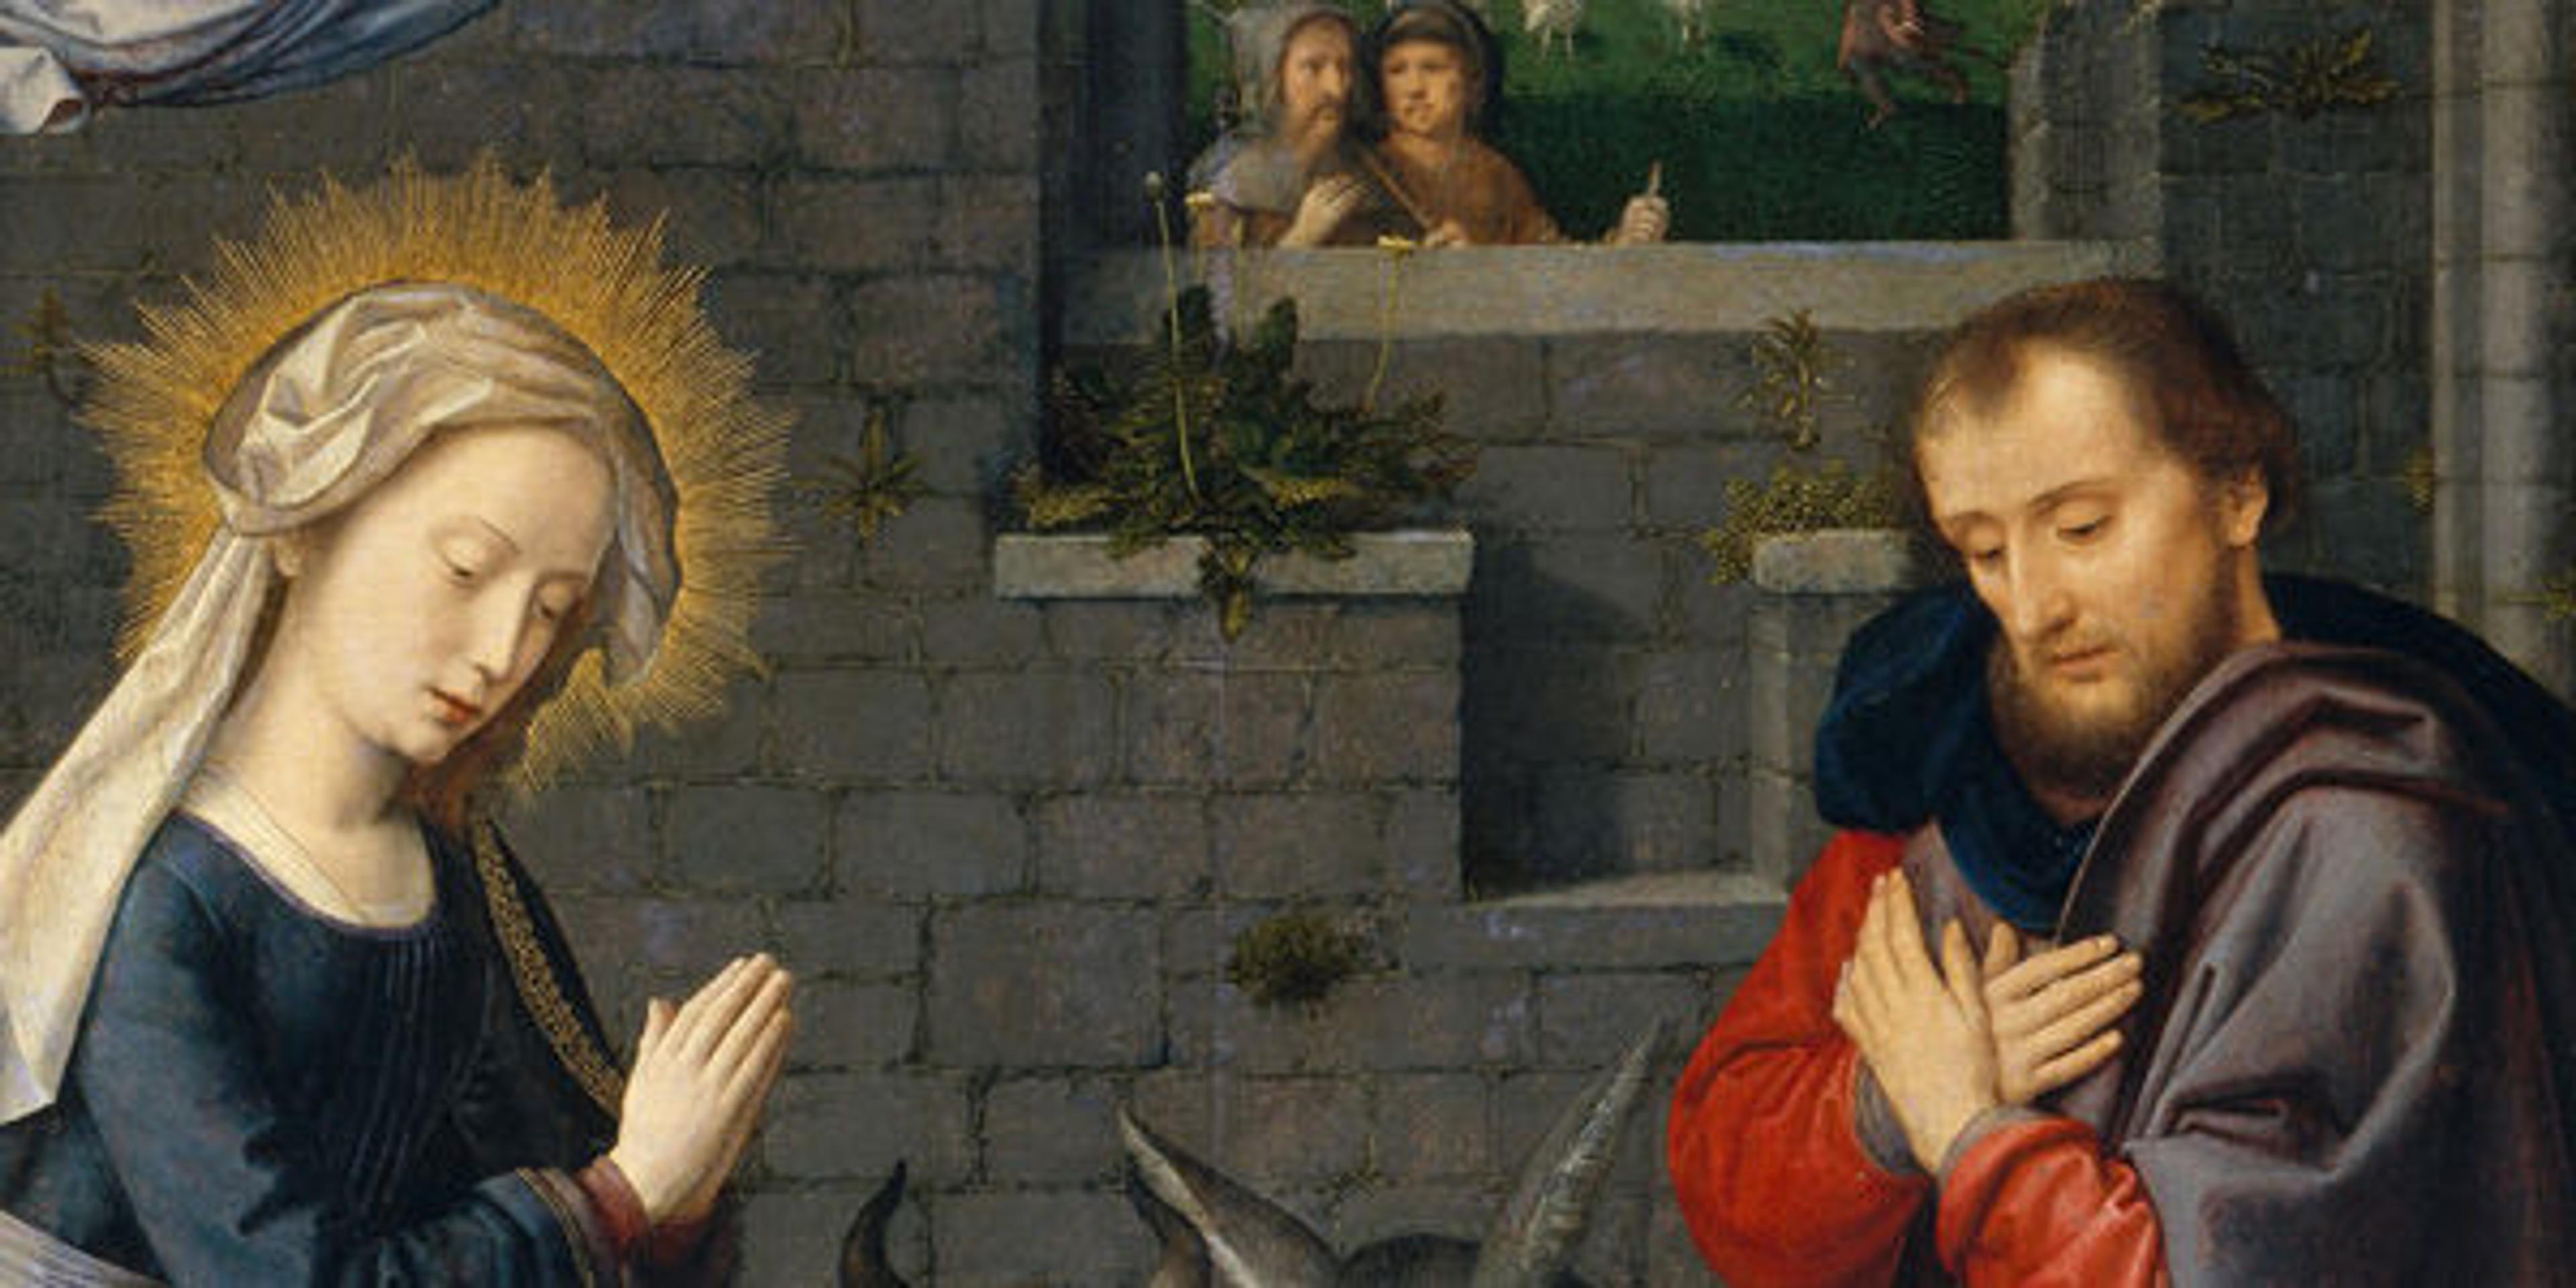 Gerard David (Netherlandish, ca. 1455–1523) | The Nativity with Donors and Saints Jerome and Leonard (detail), ca. 1510–15 | 49.7.20a–c